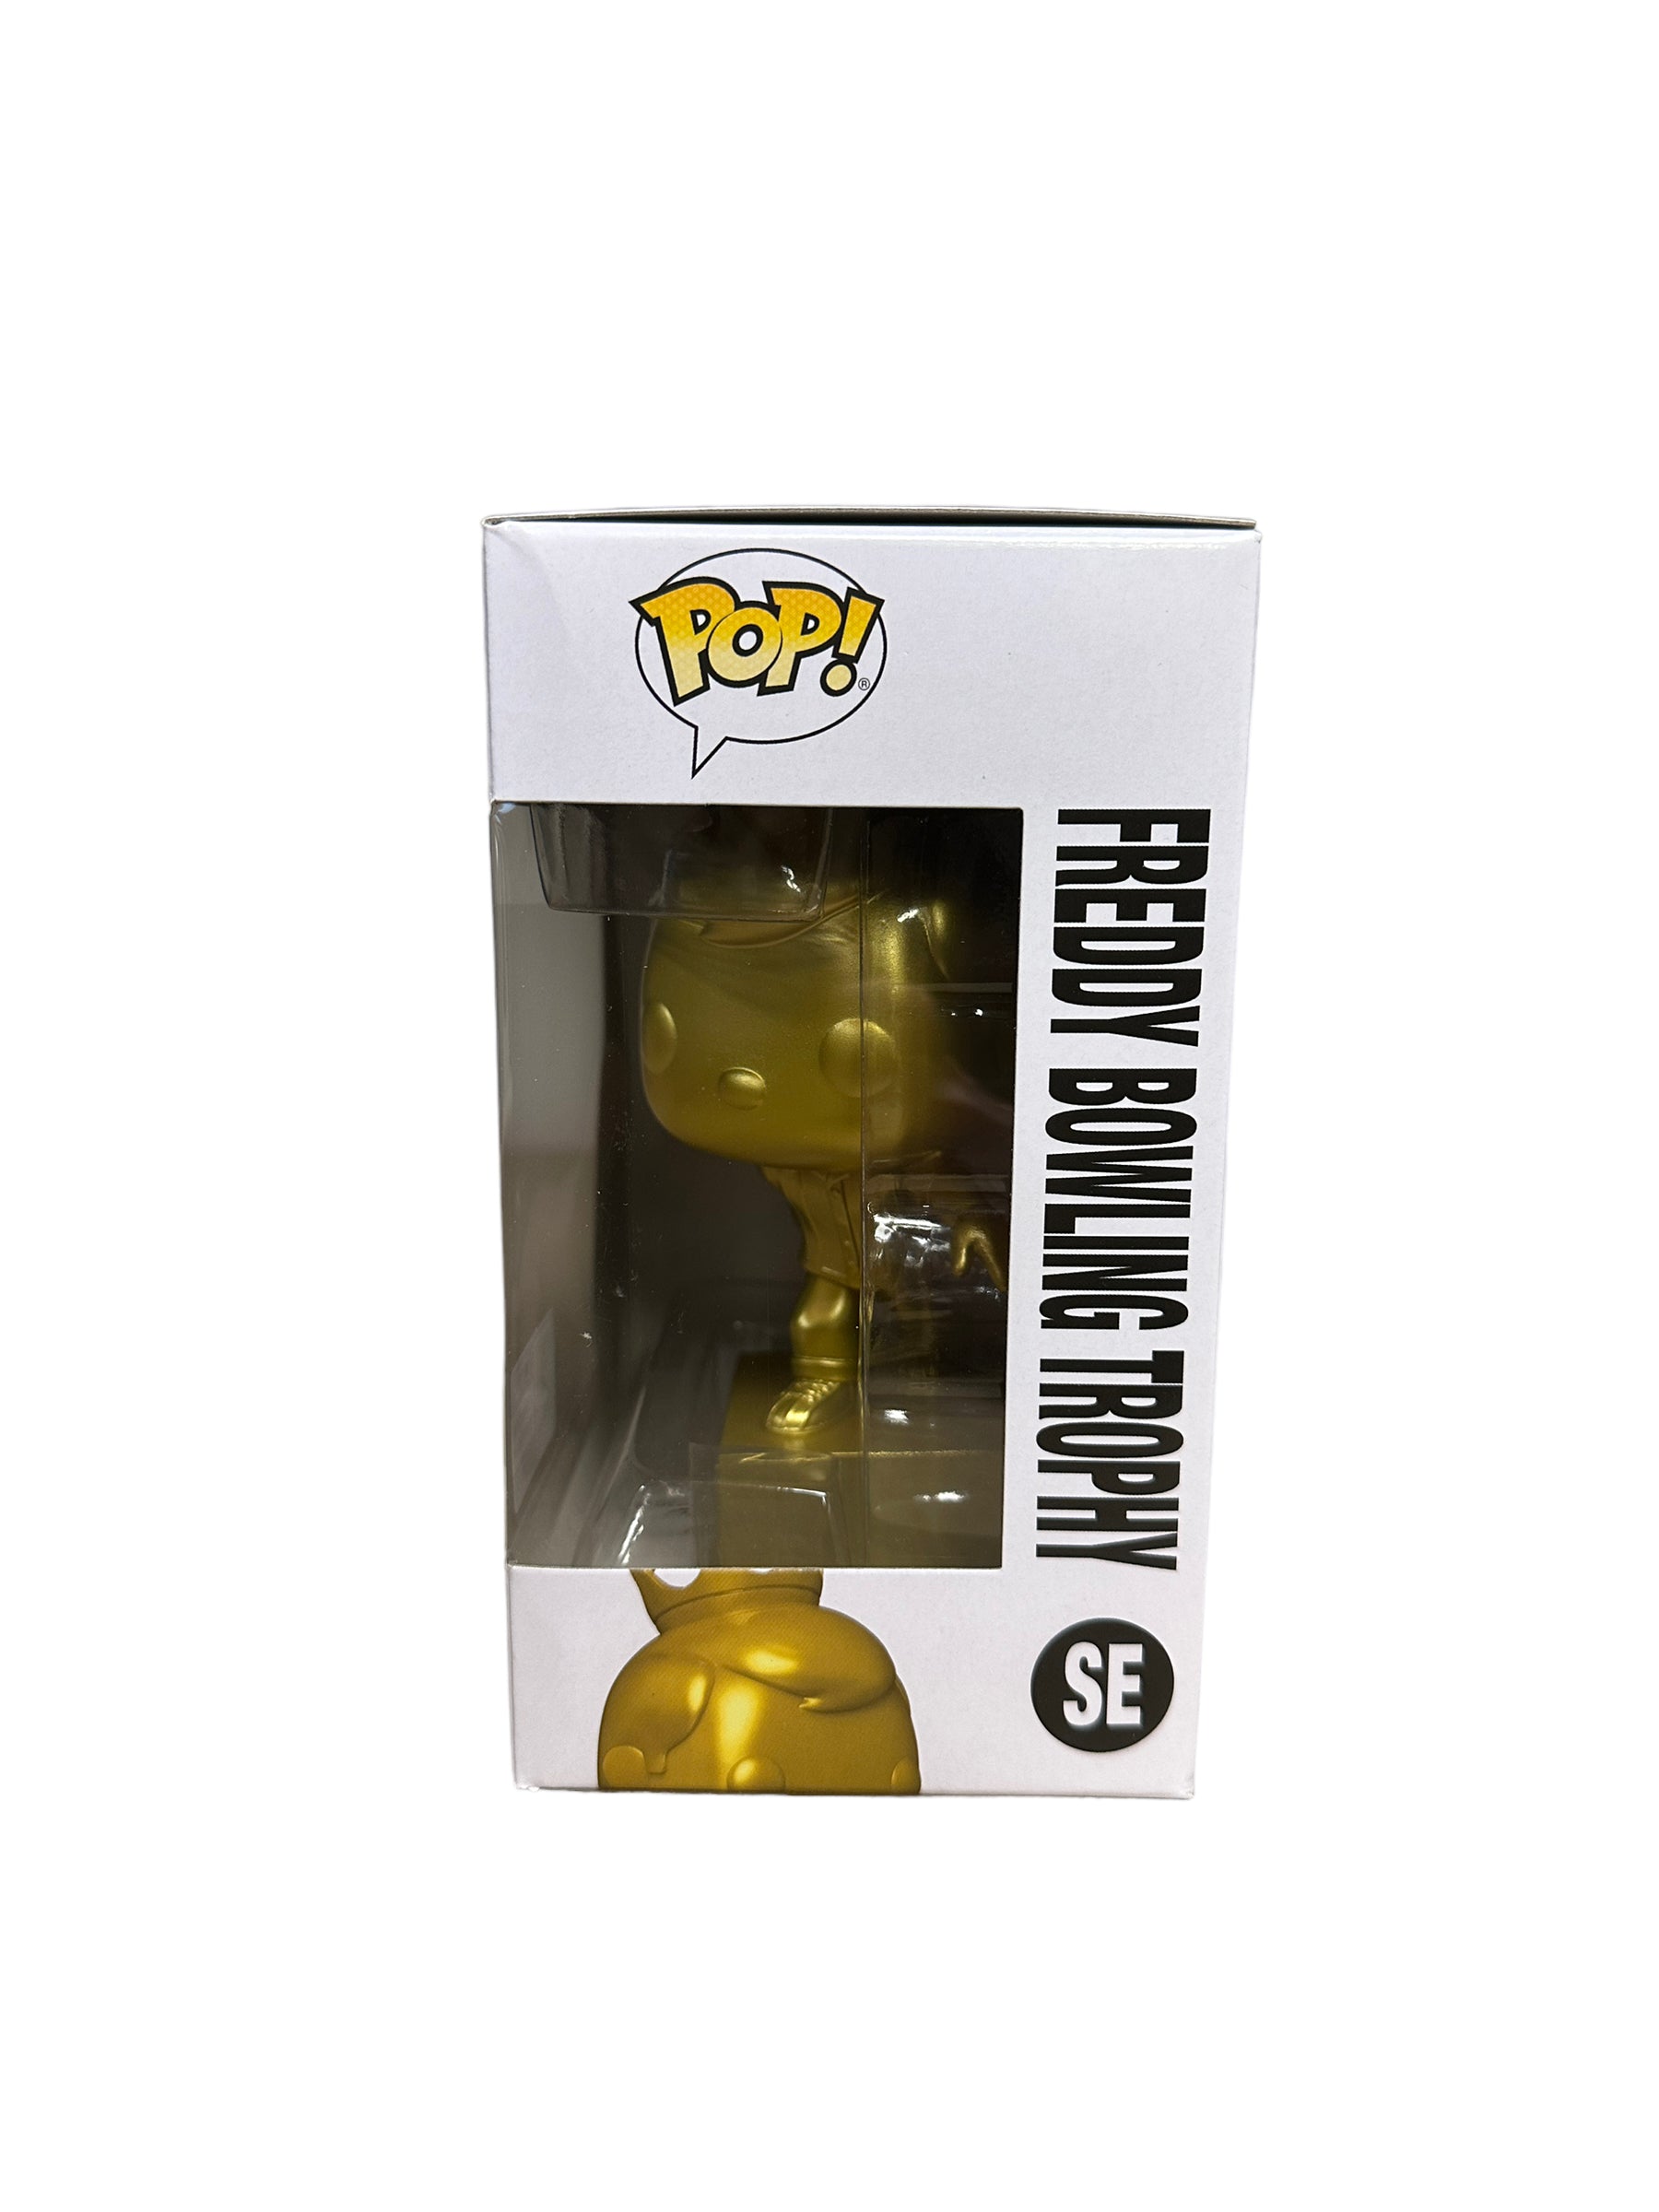 Freddy Bowling Trophy Funko Pop! - Funkoville - SDCC 2023 Official Convention Exclusive - Condition 8.5/10